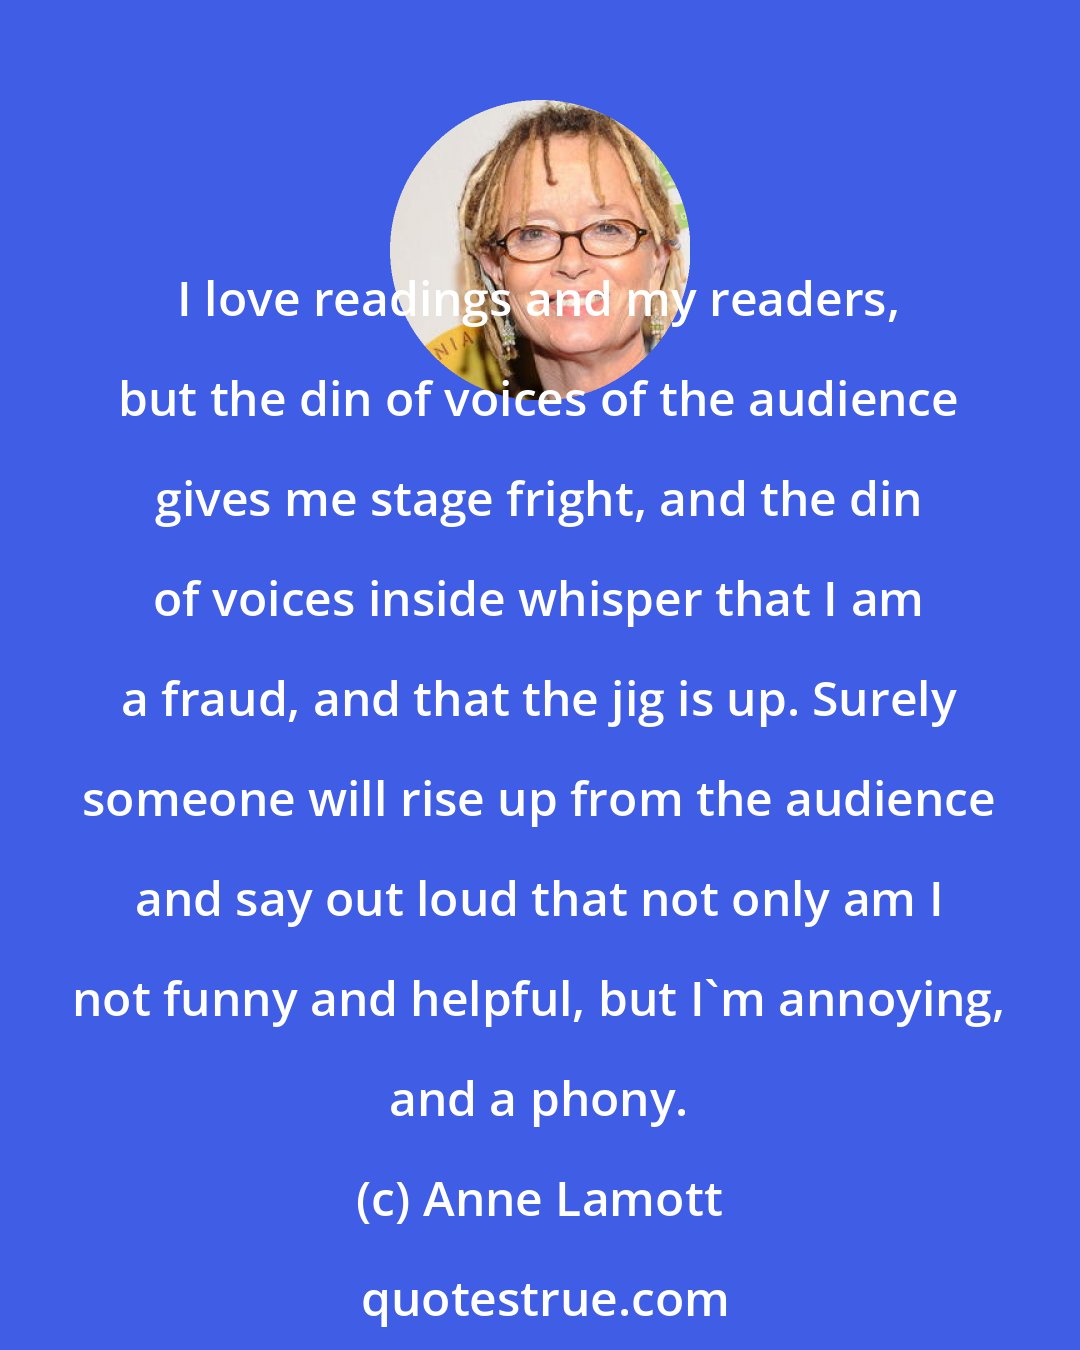 Anne Lamott: I love readings and my readers, but the din of voices of the audience gives me stage fright, and the din of voices inside whisper that I am a fraud, and that the jig is up. Surely someone will rise up from the audience and say out loud that not only am I not funny and helpful, but I'm annoying, and a phony.